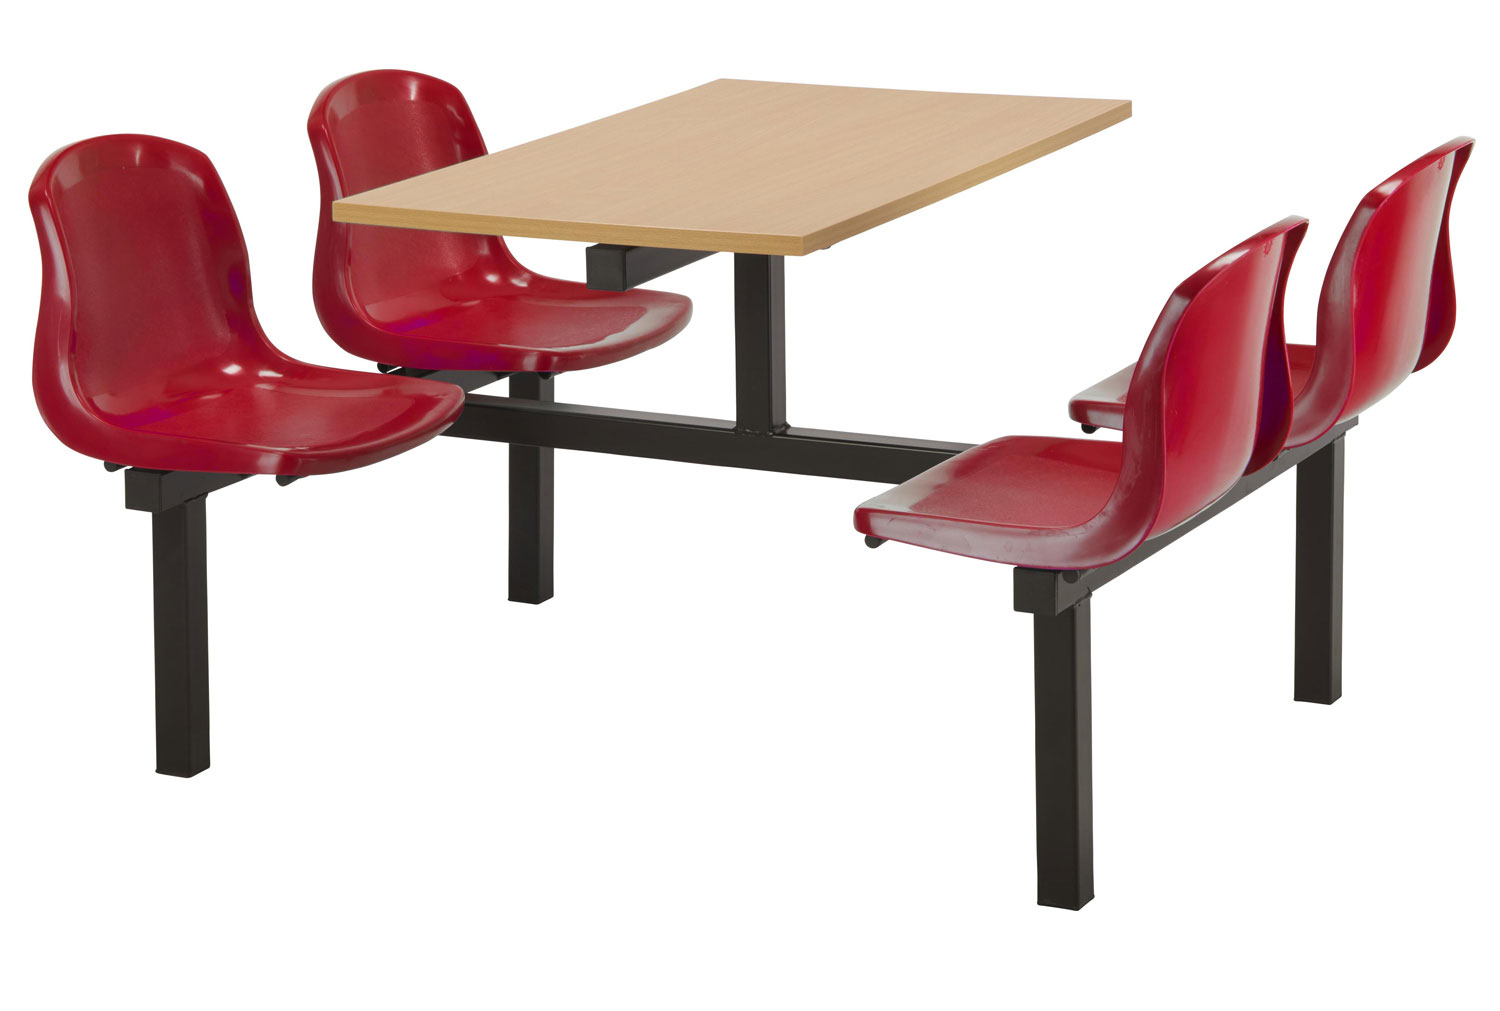 Hassan 4 Seater Fast Food Unit (Double Entry), Beech Top, Red Seats